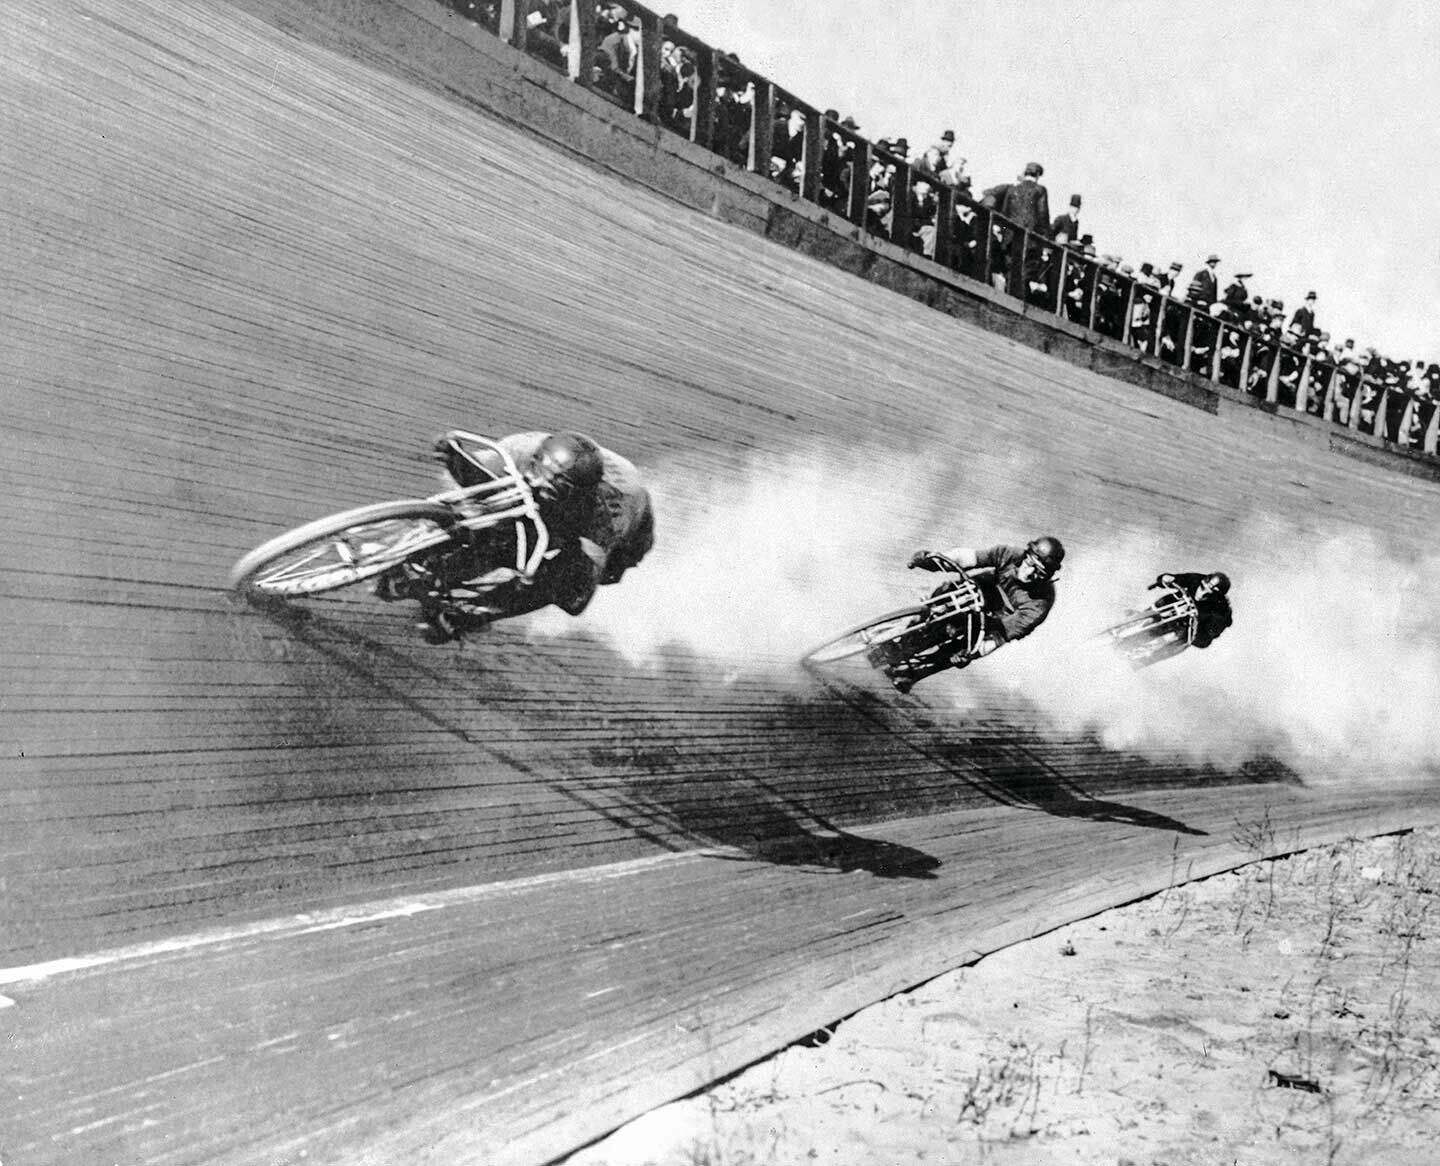 Joe Wolters, Jake DeRosier, and Charles Balke, all on Excelsiors, in the Class A heats at the opening day of racing at the Los Angeles Stadium in 1912.